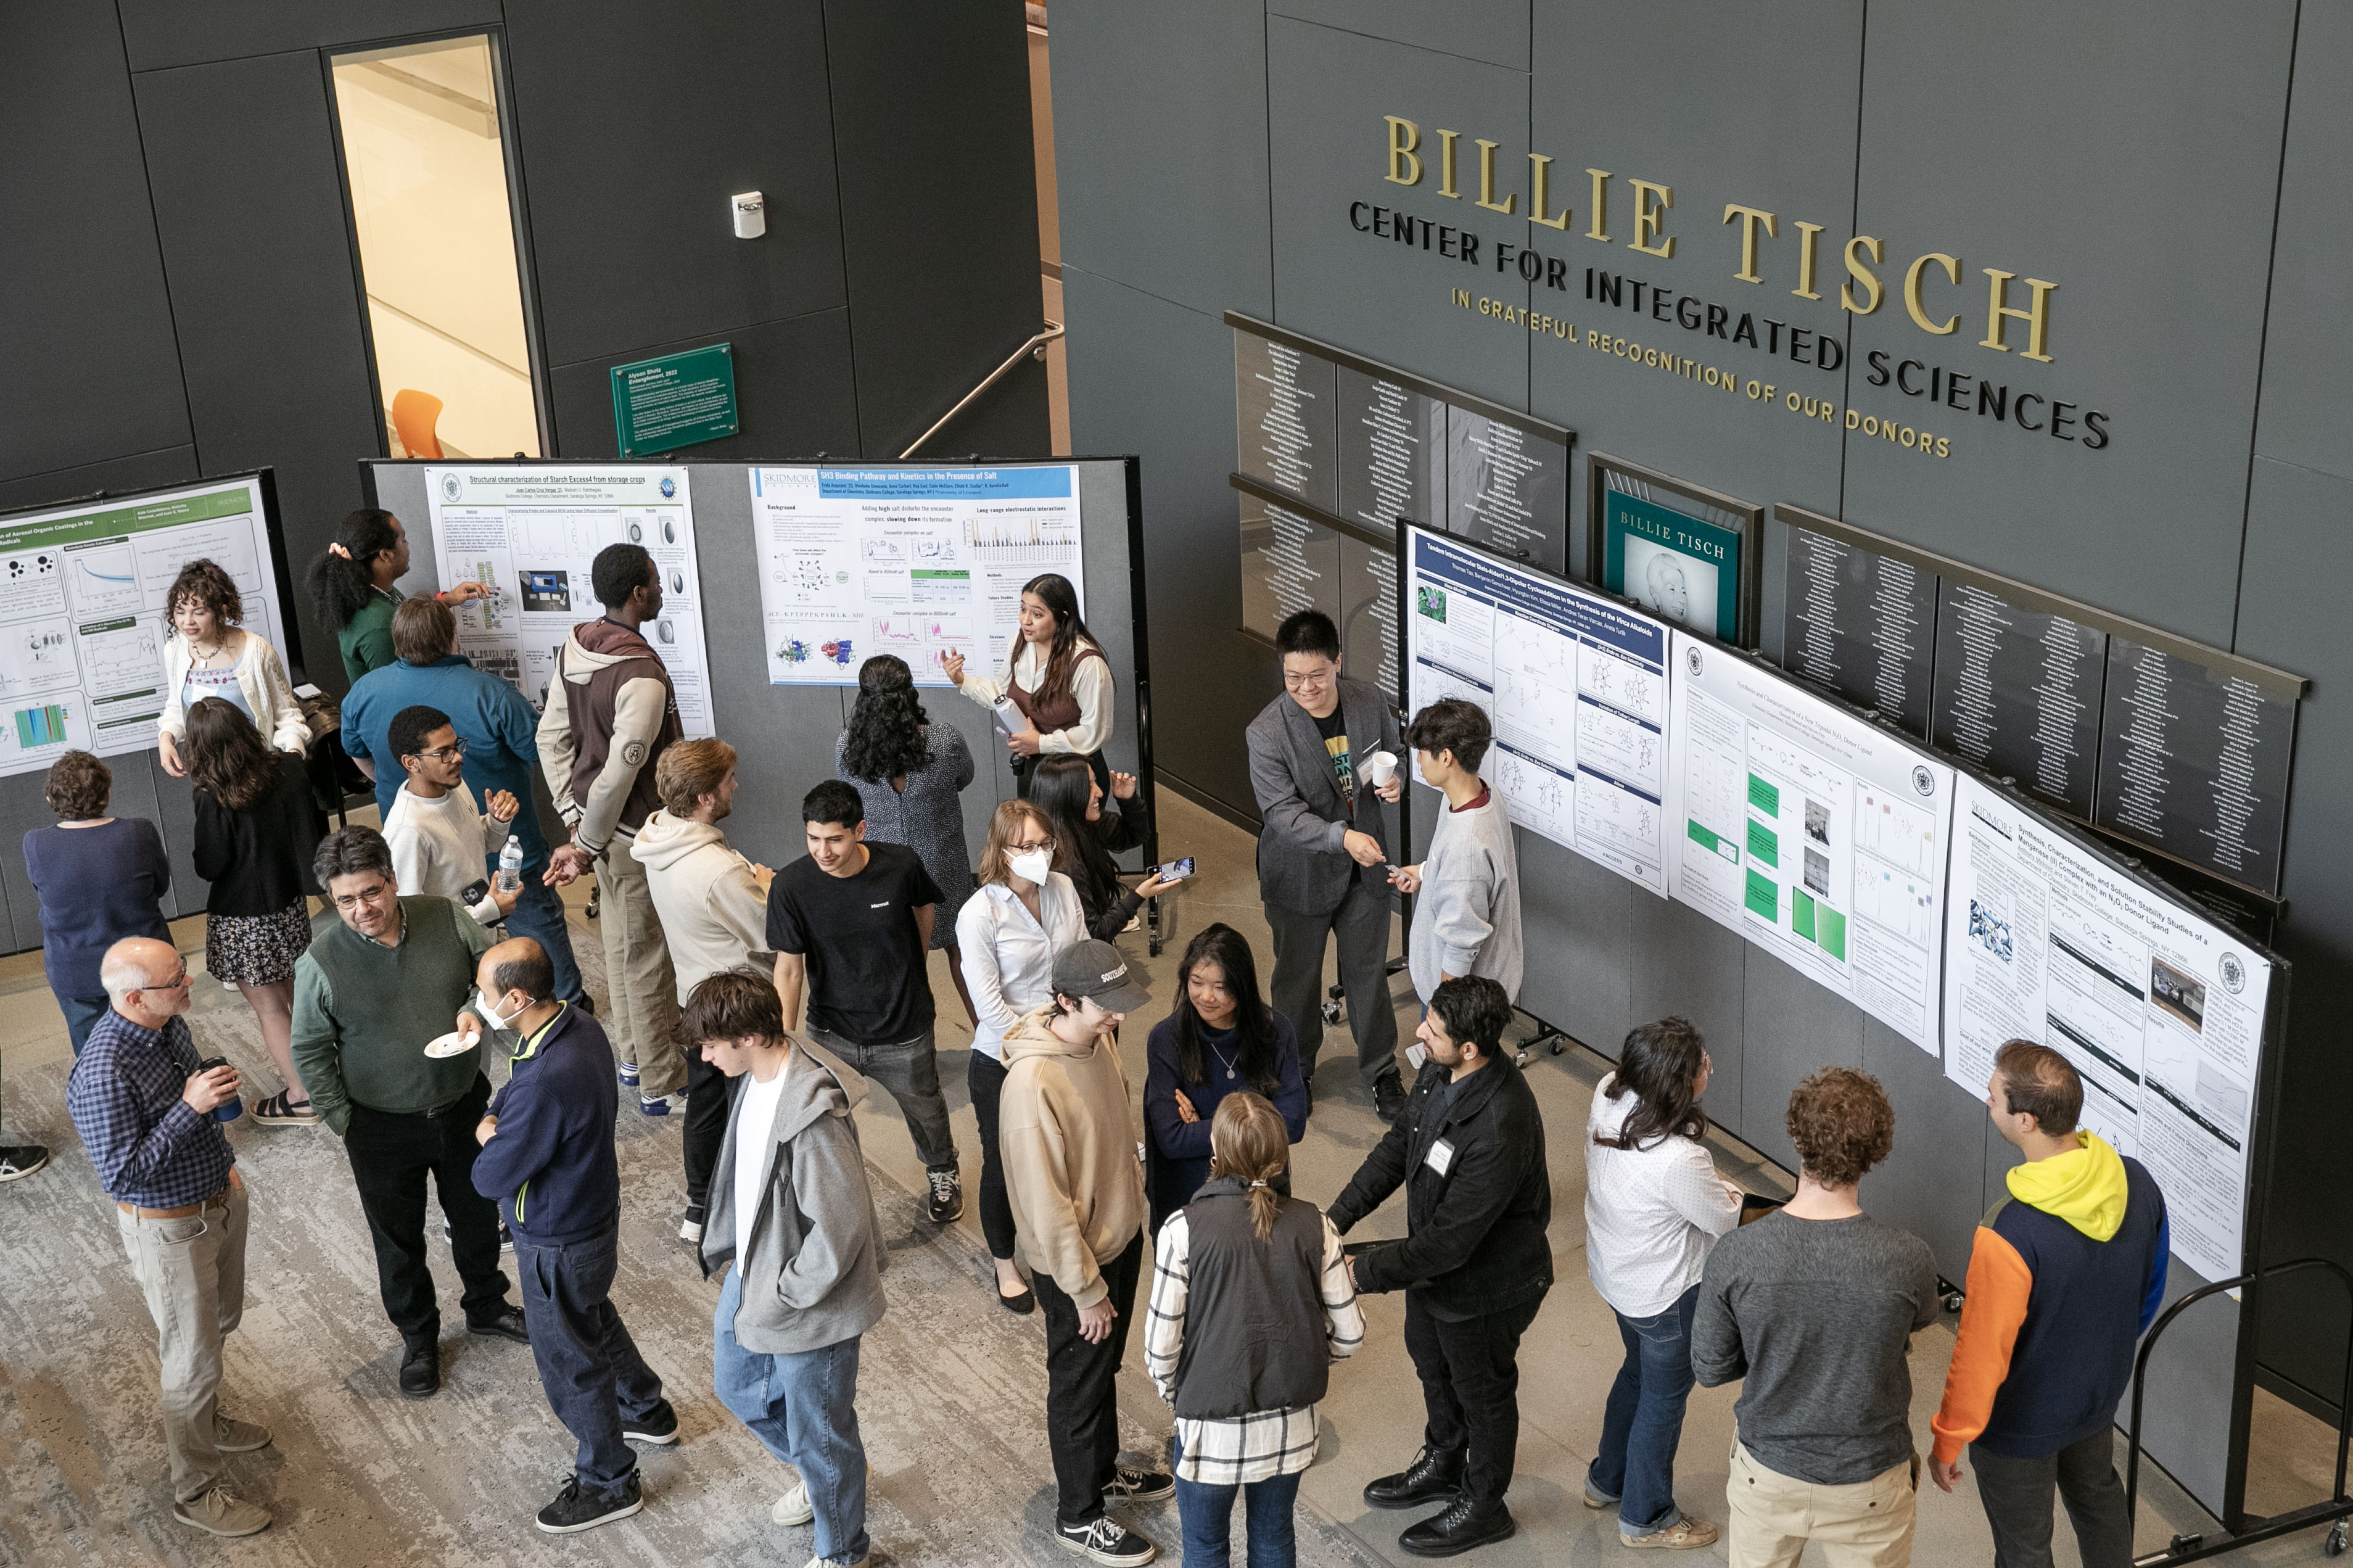 Chemistry students discuss their posters in the Billie Tisch Center for Integrated Sciences.